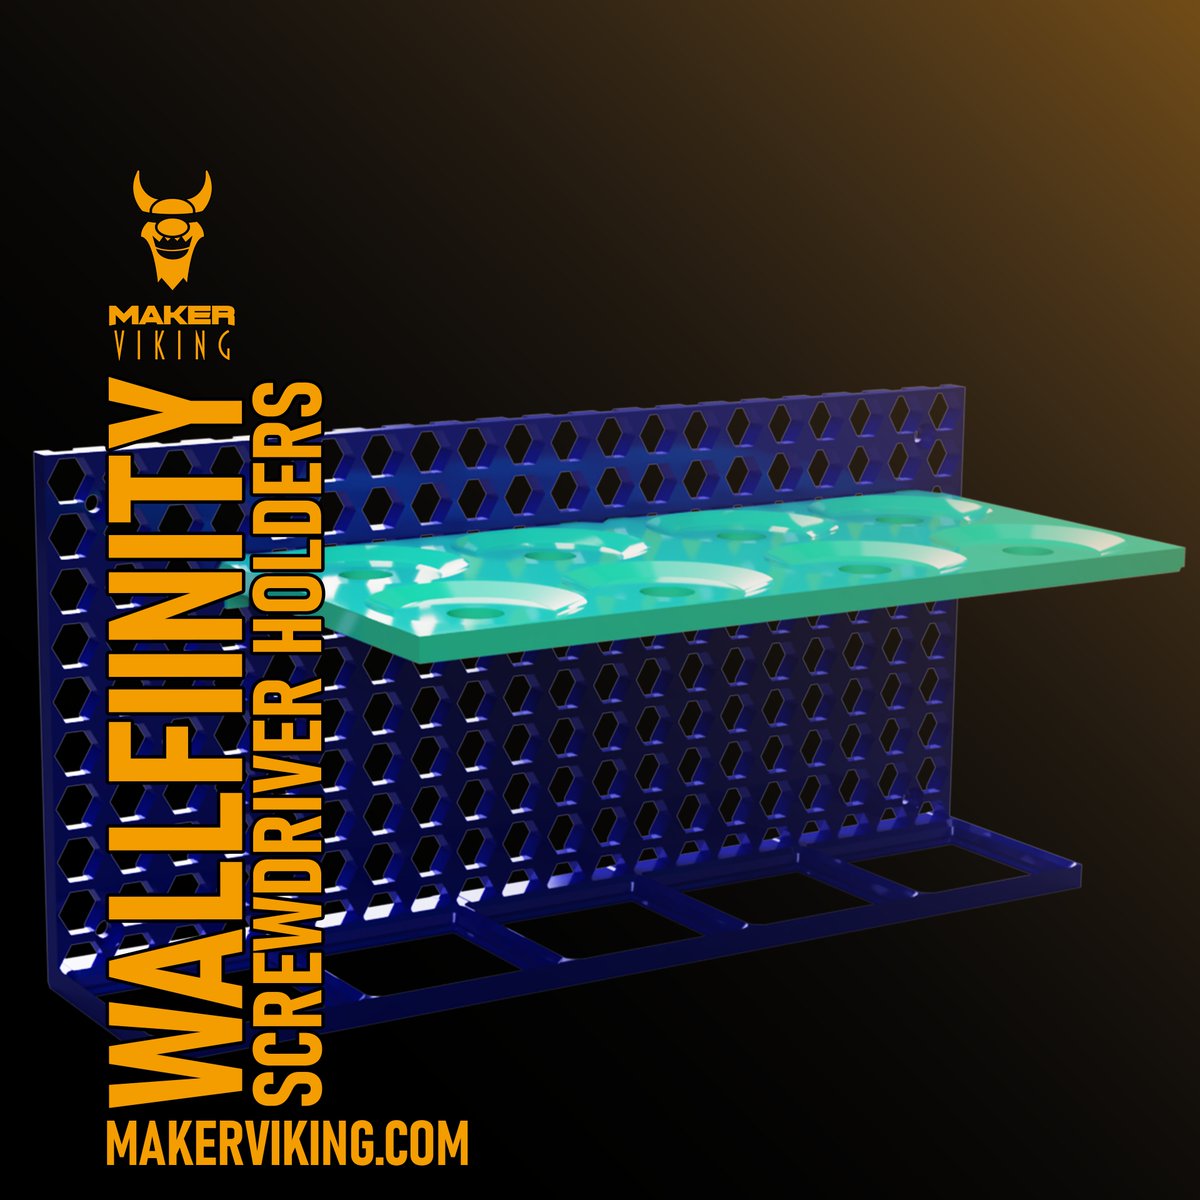 Revamp your Workshop organization with screwdriver holders for Wallfinity 1.1— Which is a cross between Gridfinity & a new wall organizing system. See it here: than.gs/m/1051067 #organizing #workshop #3DDesign @Thangs3D